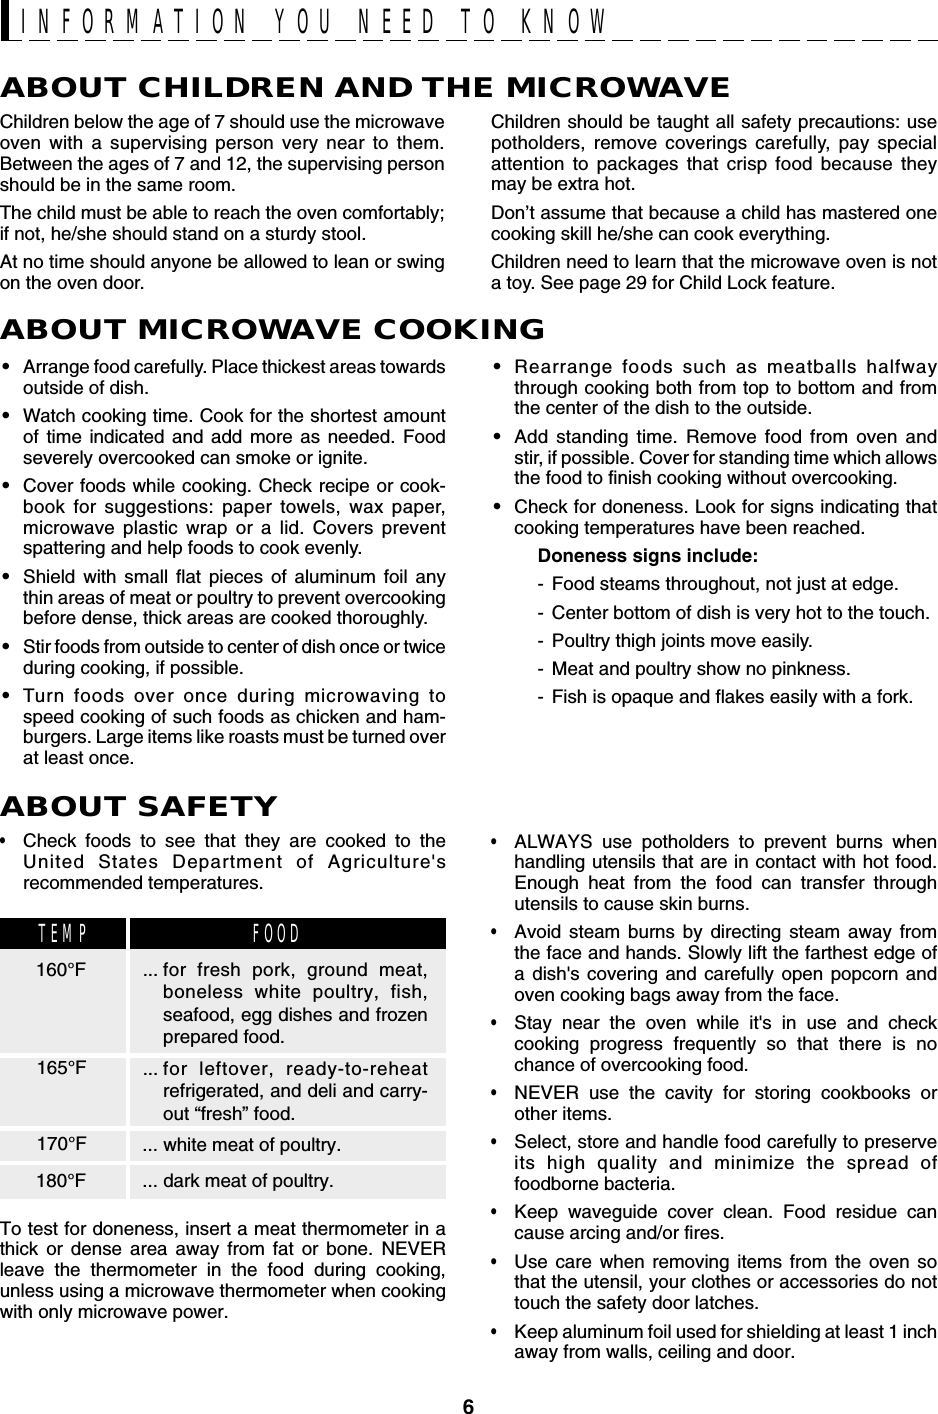 6ABOUT MICROWAVE COOKING•Arrange food carefully. Place thickest areas towardsoutside of dish.•Watch cooking time. Cook for the shortest amountof time indicated and add more as needed. Foodseverely overcooked can smoke or ignite.•Cover foods while cooking. Check recipe or cook-book for suggestions: paper towels, wax paper,microwave plastic wrap or a lid. Covers preventspattering and help foods to cook evenly.•Shield with small flat pieces of aluminum foil anythin areas of meat or poultry to prevent overcookingbefore dense, thick areas are cooked thoroughly.•Stir foods from outside to center of dish once or twiceduring cooking, if possible.•Turn foods over once during microwaving tospeed cooking of such foods as chicken and ham-burgers. Large items like roasts must be turned overat least once.INFORMATION YOU NEED TO KNOW•Rearrange foods such as meatballs halfwaythrough cooking both from top to bottom and fromthe center of the dish to the outside.•Add standing time. Remove food from oven andstir, if possible. Cover for standing time which allowsthe food to finish cooking without overcooking.•Check for doneness. Look for signs indicating thatcooking temperatures have been reached.Doneness signs include:- Food steams throughout, not just at edge.- Center bottom of dish is very hot to the touch.- Poultry thigh joints move easily.- Meat and poultry show no pinkness.- Fish is opaque and flakes easily with a fork.Children should be taught all safety precautions: usepotholders, remove coverings carefully, pay specialattention to packages that crisp food because theymay be extra hot.Don’t assume that because a child has mastered onecooking skill he/she can cook everything.Children need to learn that the microwave oven is nota toy. See page 29 for Child Lock feature.ABOUT CHILDREN AND THE MICROWAVEChildren below the age of 7 should use the microwaveoven with a supervising person very near to them.Between the ages of 7 and 12, the supervising personshould be in the same room.The child must be able to reach the oven comfortably;if not, he/she should stand on a sturdy stool.At no time should anyone be allowed to lean or swingon the oven door.•Check foods to see that they are cooked to theUnited States Department of Agriculture&apos;srecommended temperatures.To test for doneness, insert a meat thermometer in athick or dense area away from fat or bone. NEVERleave the thermometer in the food during cooking,unless using a microwave thermometer when cookingwith only microwave power.•ALWAYS use potholders to prevent burns whenhandling utensils that are in contact with hot food.Enough heat from the food can transfer throughutensils to cause skin burns.•Avoid steam burns by directing steam away fromthe face and hands. Slowly lift the farthest edge ofa dish&apos;s covering and carefully open popcorn andoven cooking bags away from the face.•Stay near the oven while it&apos;s in use and checkcooking progress frequently so that there is nochance of overcooking food.•NEVER use the cavity for storing cookbooks orother items.•Select, store and handle food carefully to preserveits high quality and minimize the spread offoodborne bacteria.•Keep waveguide cover clean. Food residue cancause arcing and/or fires.•Use care when removing items from the oven sothat the utensil, your clothes or accessories do nottouch the safety door latches.•Keep aluminum foil used for shielding at least 1 inchaway from walls, ceiling and door.ABOUT SAFETY... for fresh pork, ground meat,boneless white poultry, fish,seafood, egg dishes and frozenprepared food.... for leftover, ready-to-reheatrefrigerated, and deli and carry-out “fresh” food.... white meat of poultry.... dark meat of poultry.160°FTEMP FOOD165°F170°F180°F